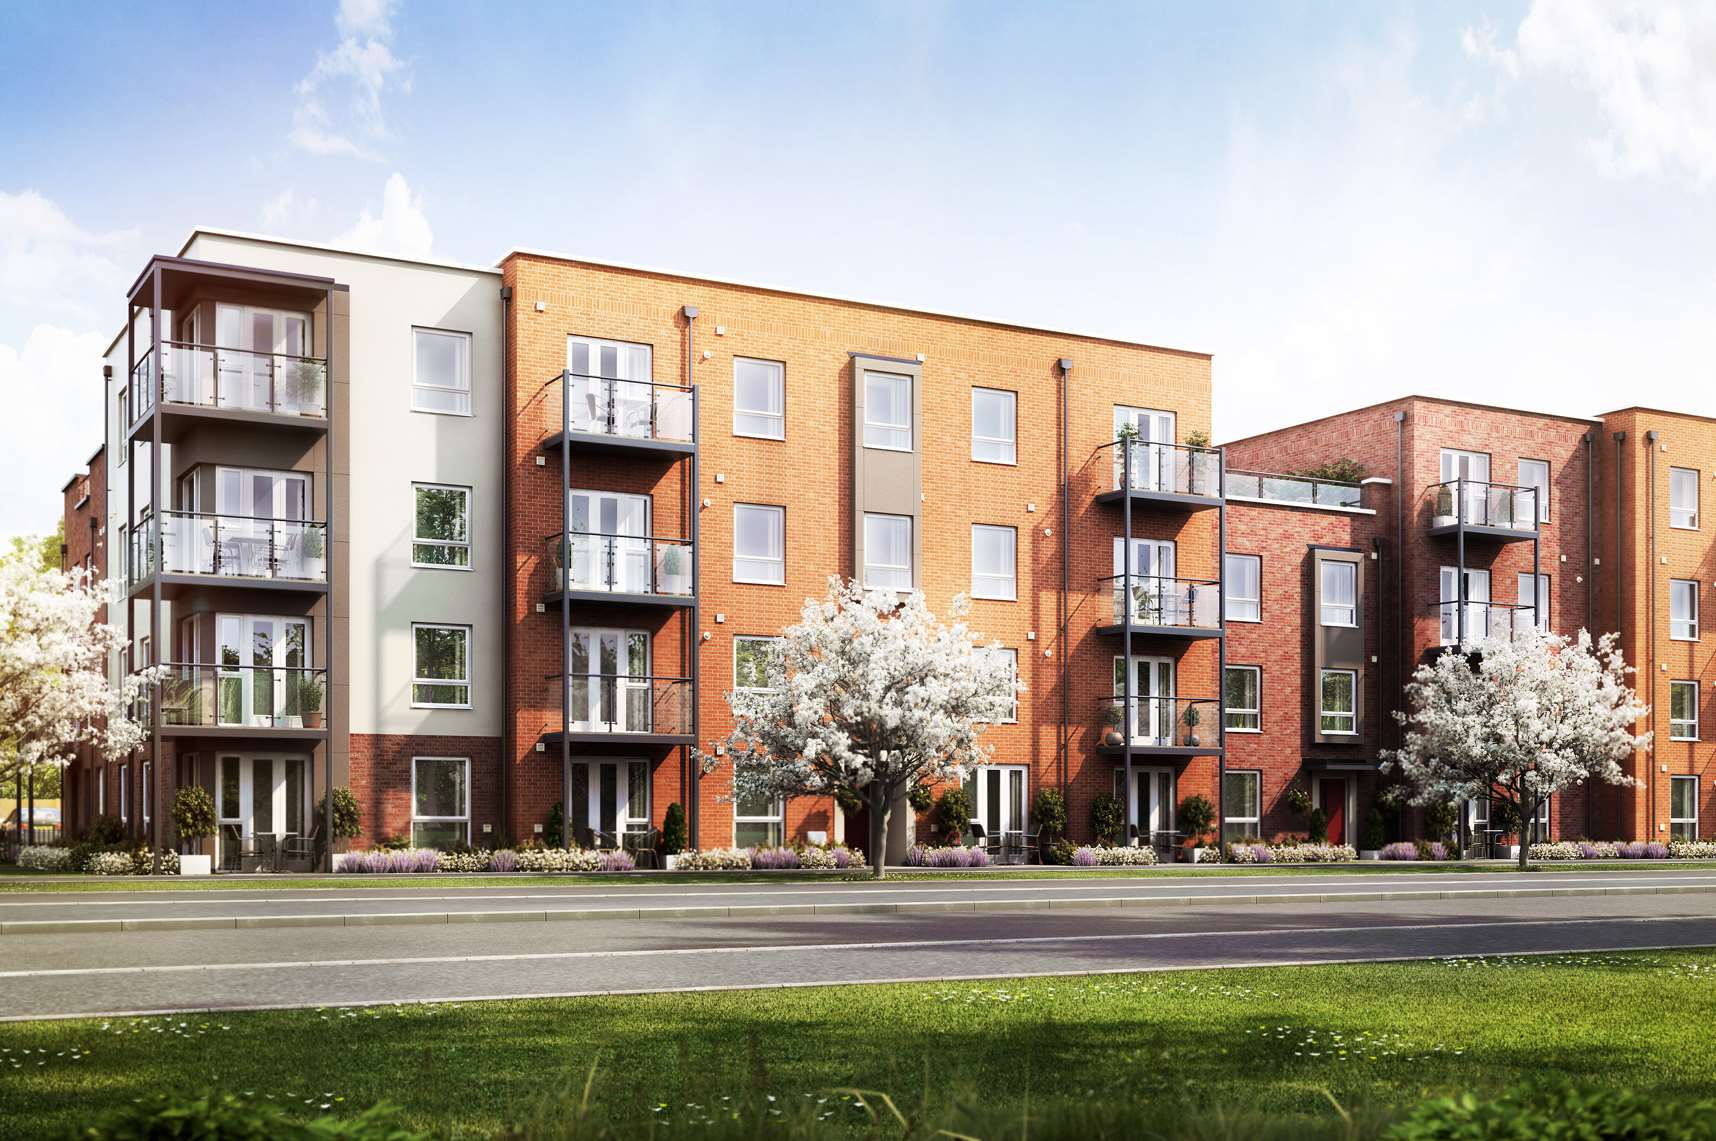 The first phase of apartments built by Barratt Homes in Castle Hill, Ebbsfleet, are about to go on sale